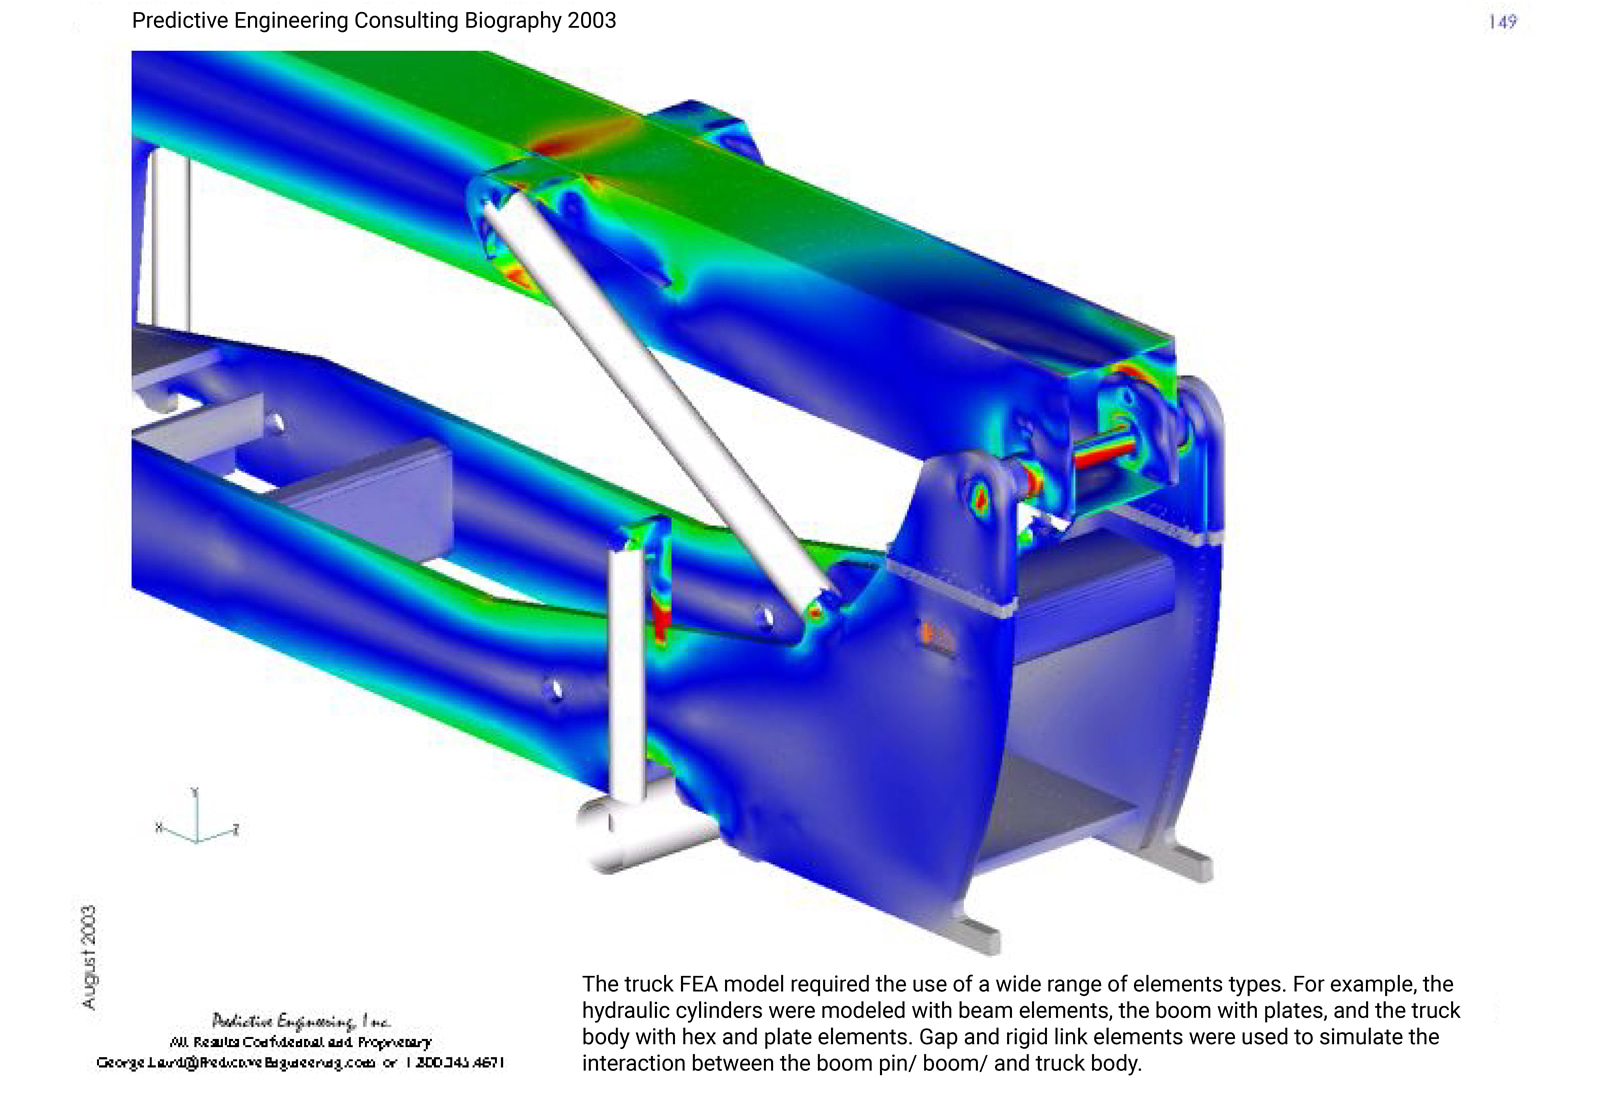 The FEA model (Femap) of the lift-truck used a wide range of FE element types from solid to plate to RBE to beam elements